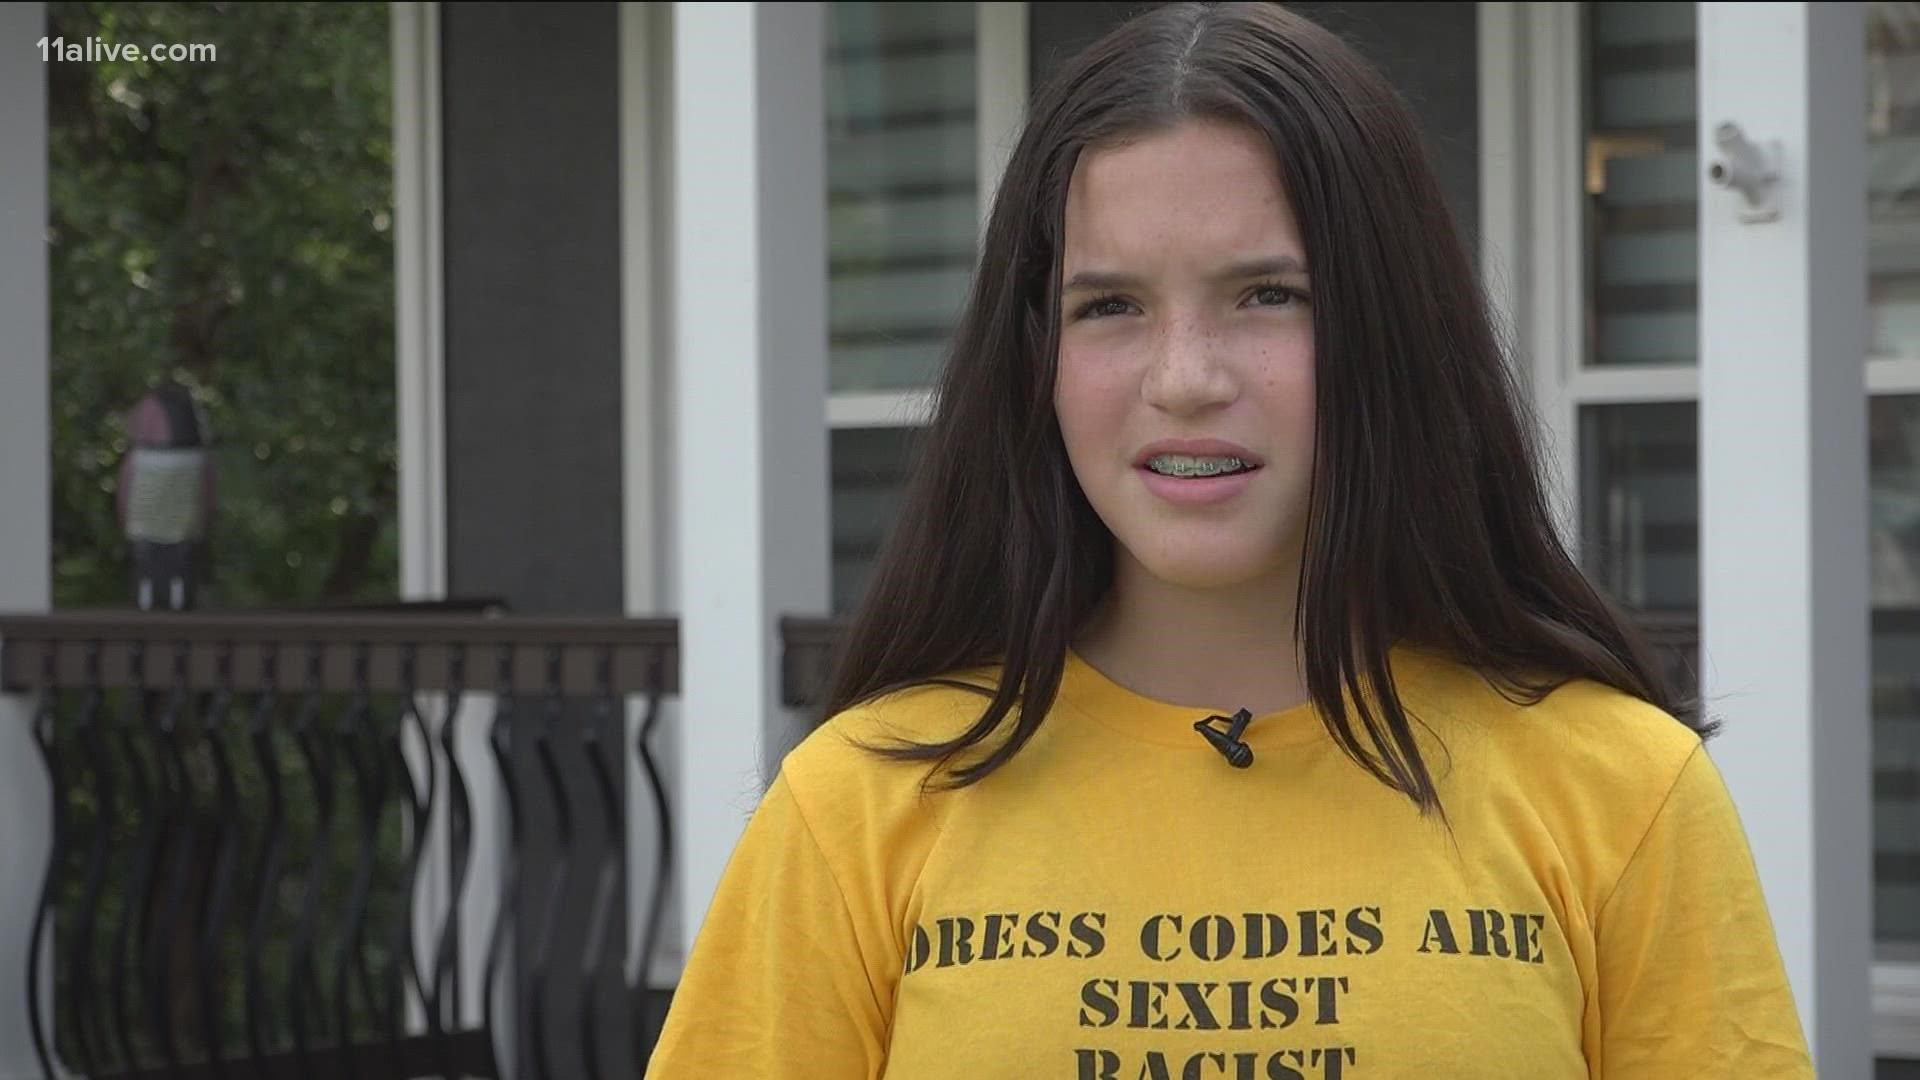 She started a T-Shirt campaign to protest the district policy.